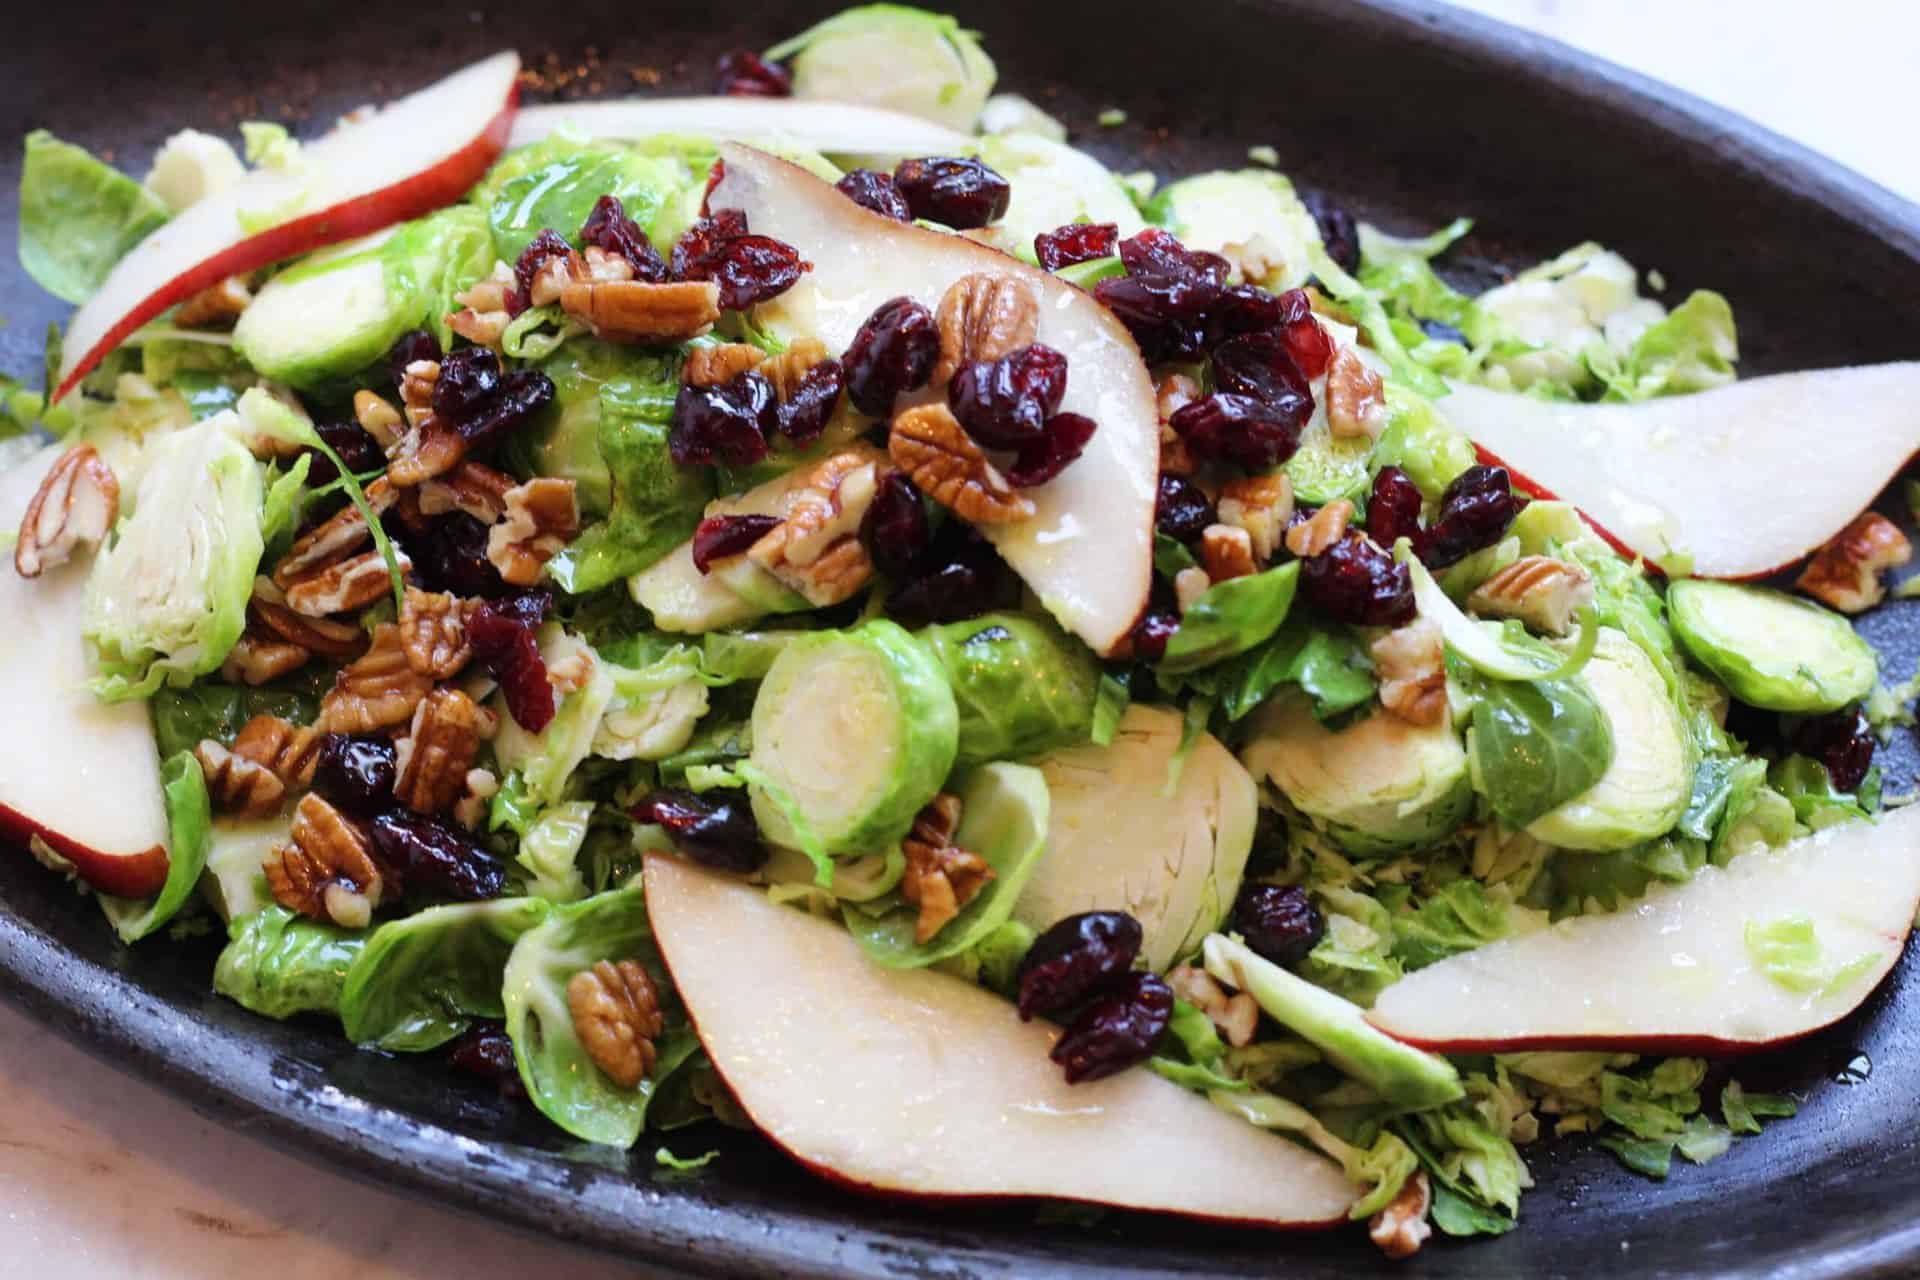 Warm Brussel Sprout and Pear Salad